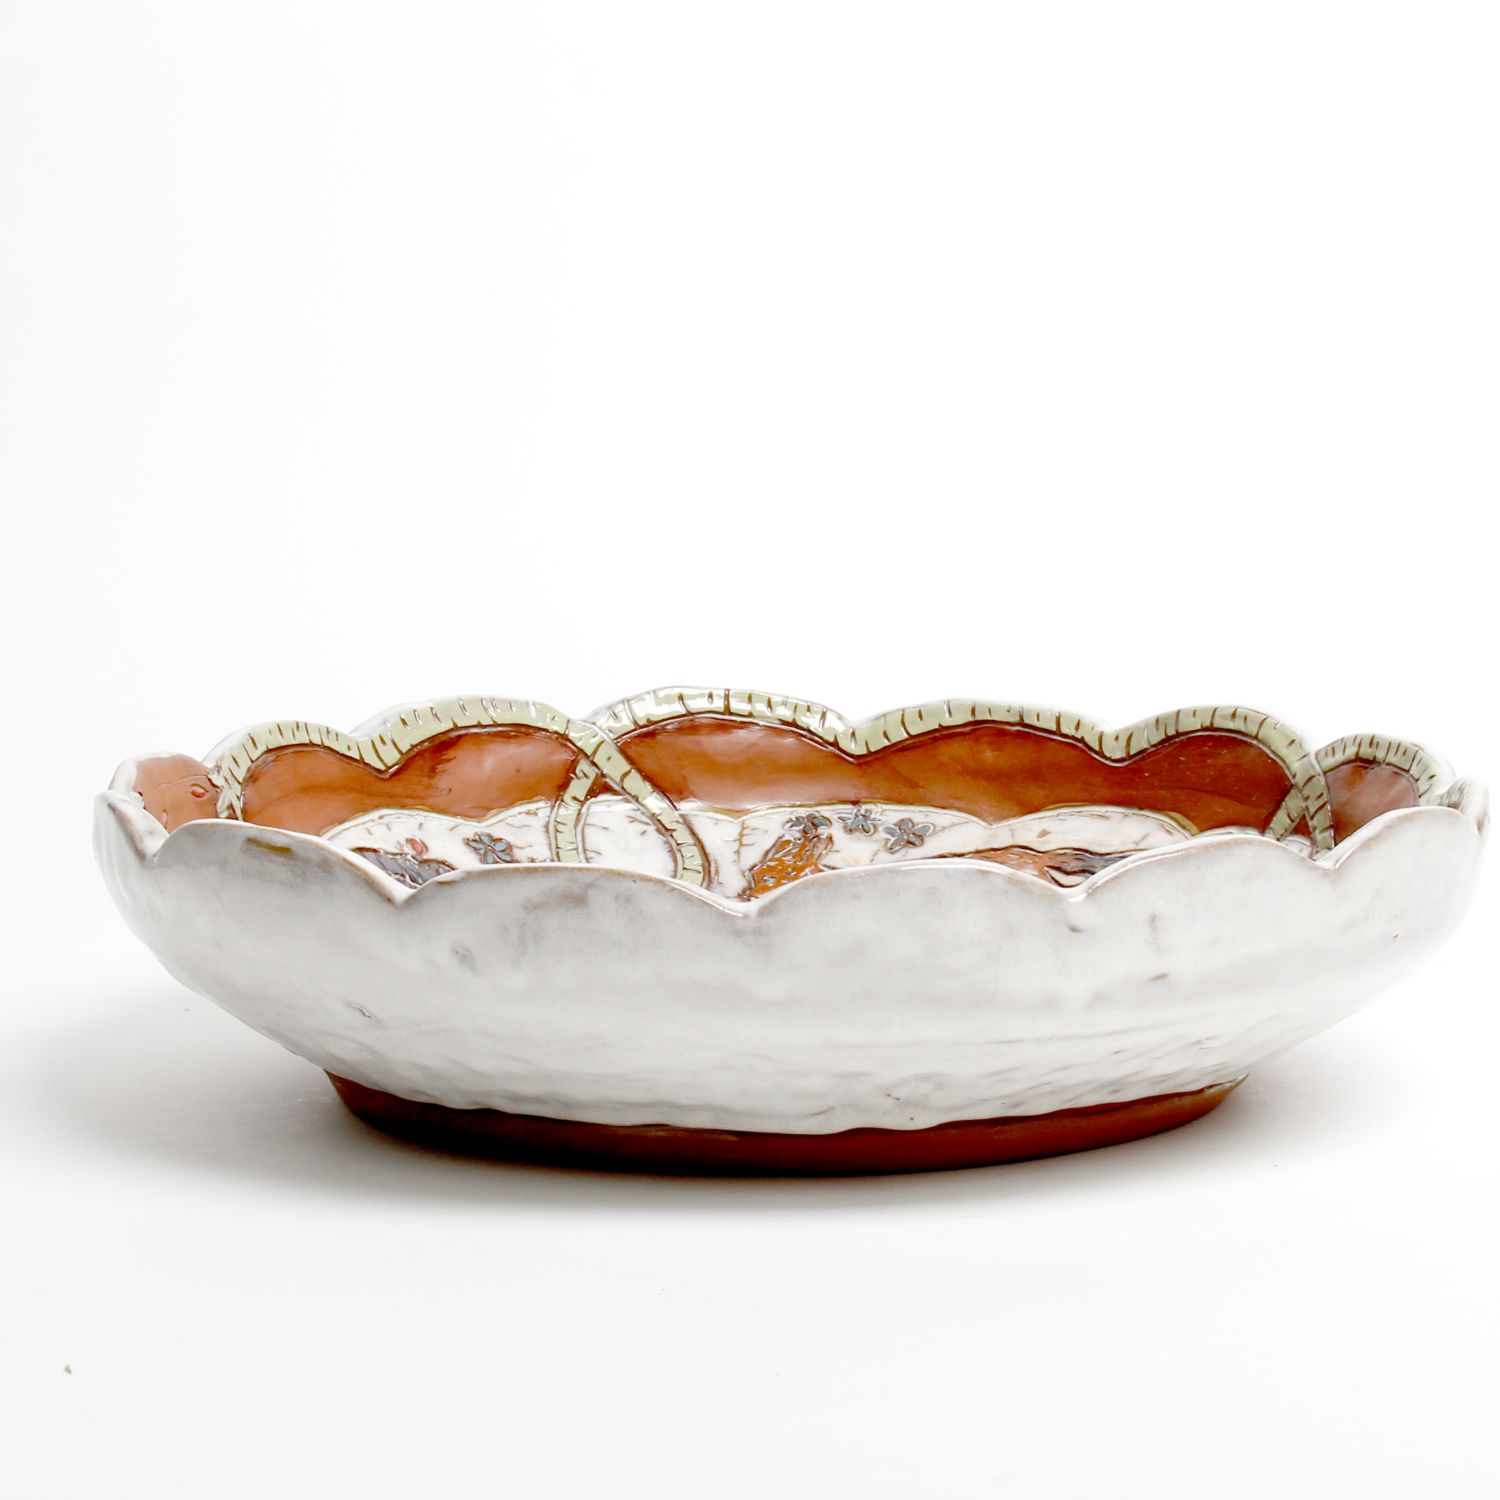 Zoe Pinnell: Fox Serving Bowl Product Image 2 of 4